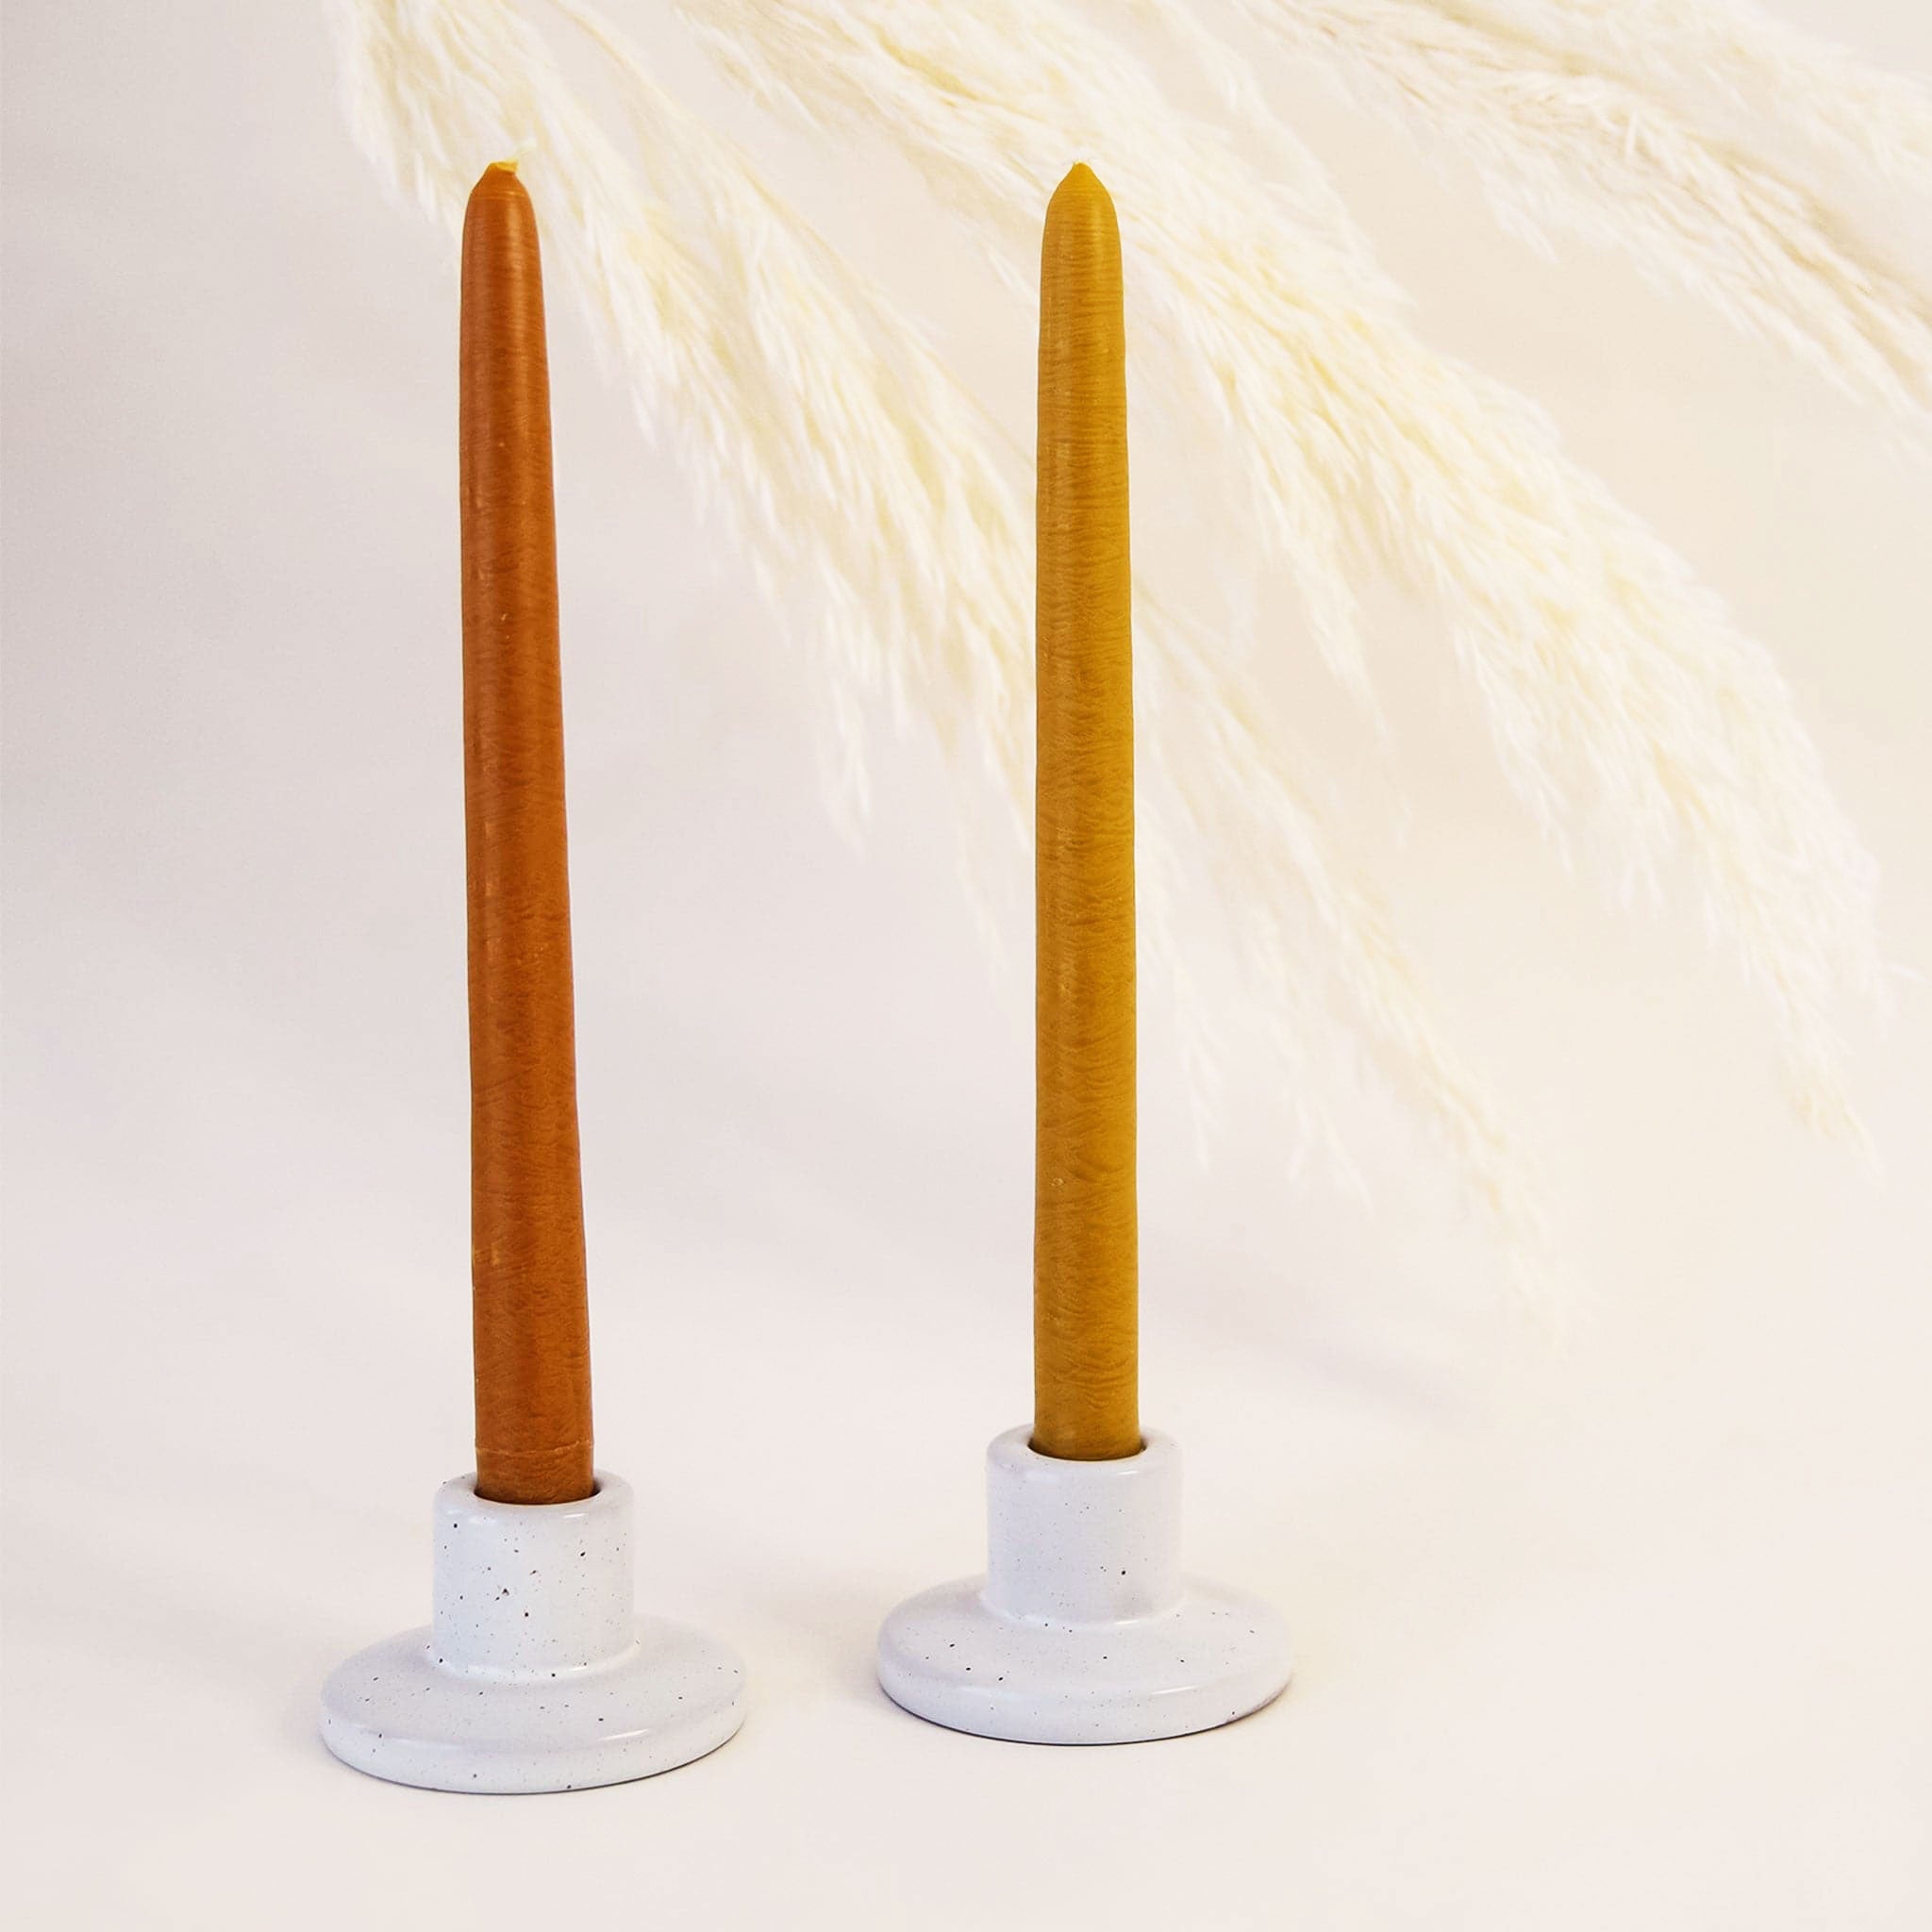 In front of a white background is two ceramic candle holders. The gray speckled candle holders have a round base with a short tapered top. Inside the right candle holder is a mustard yellow candle stick and in the left is a dark orange candle stick.